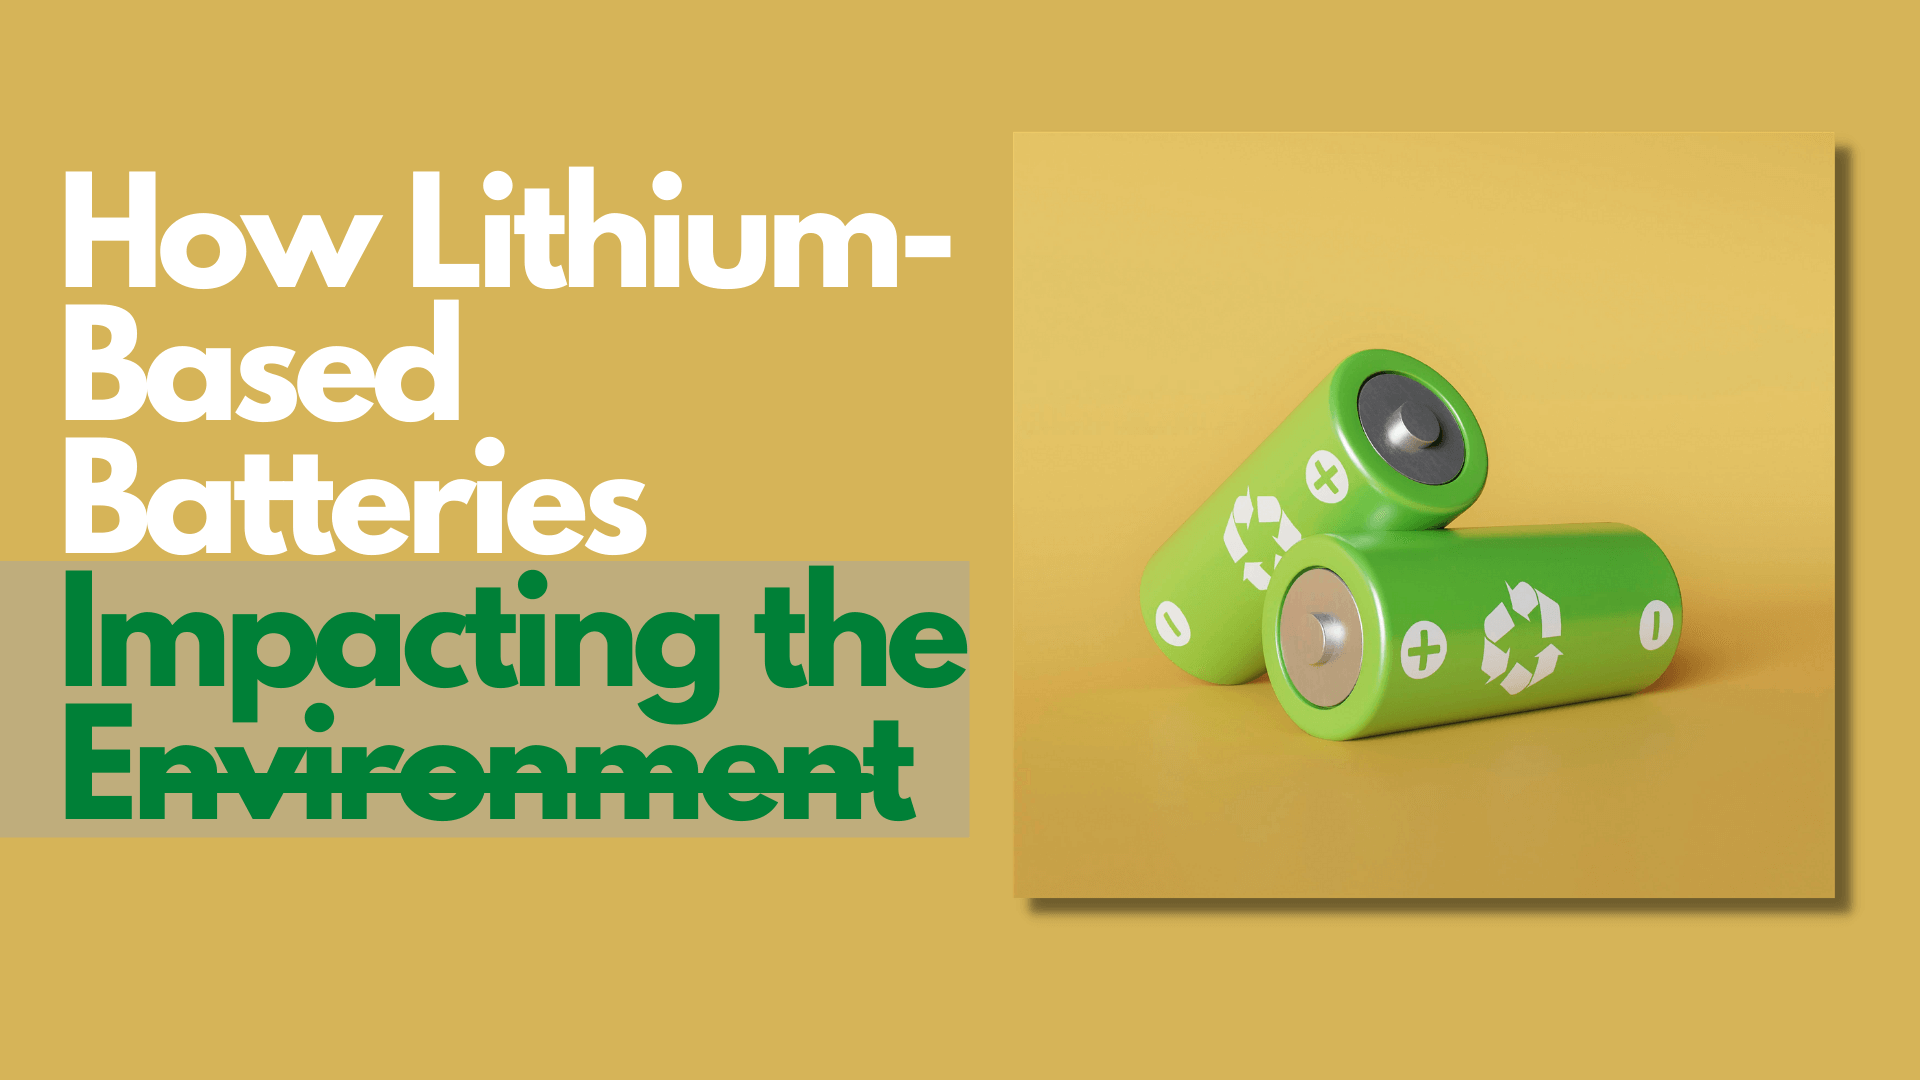 https://e-vehicleinfo.com/environmental-impacts-of-lithium-ion-batteries-in-electric-vehicles/